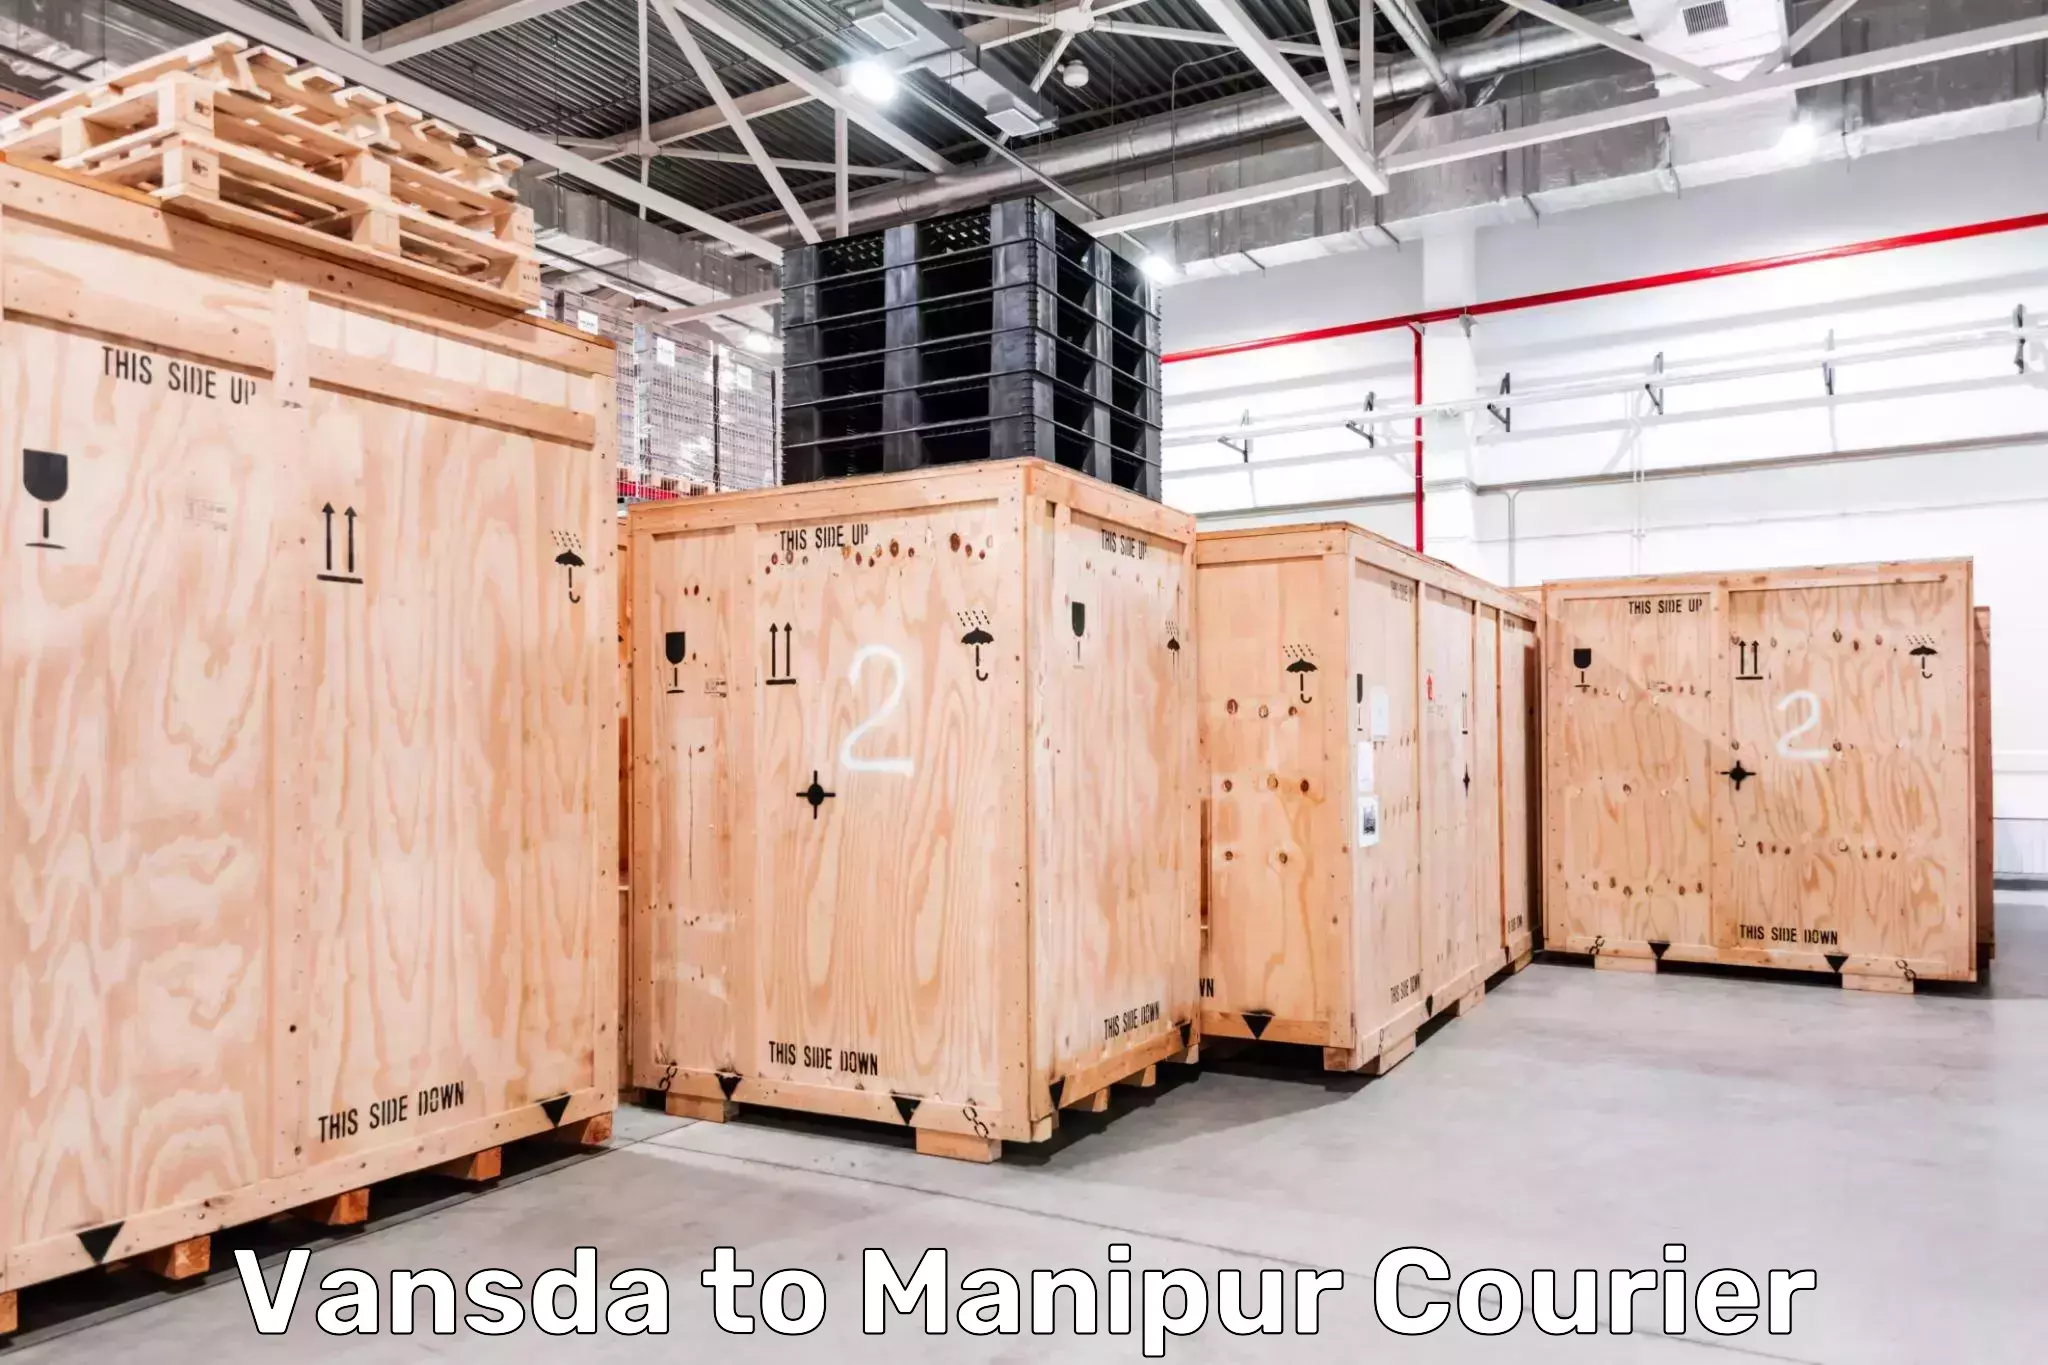 Cash on delivery service Vansda to Manipur